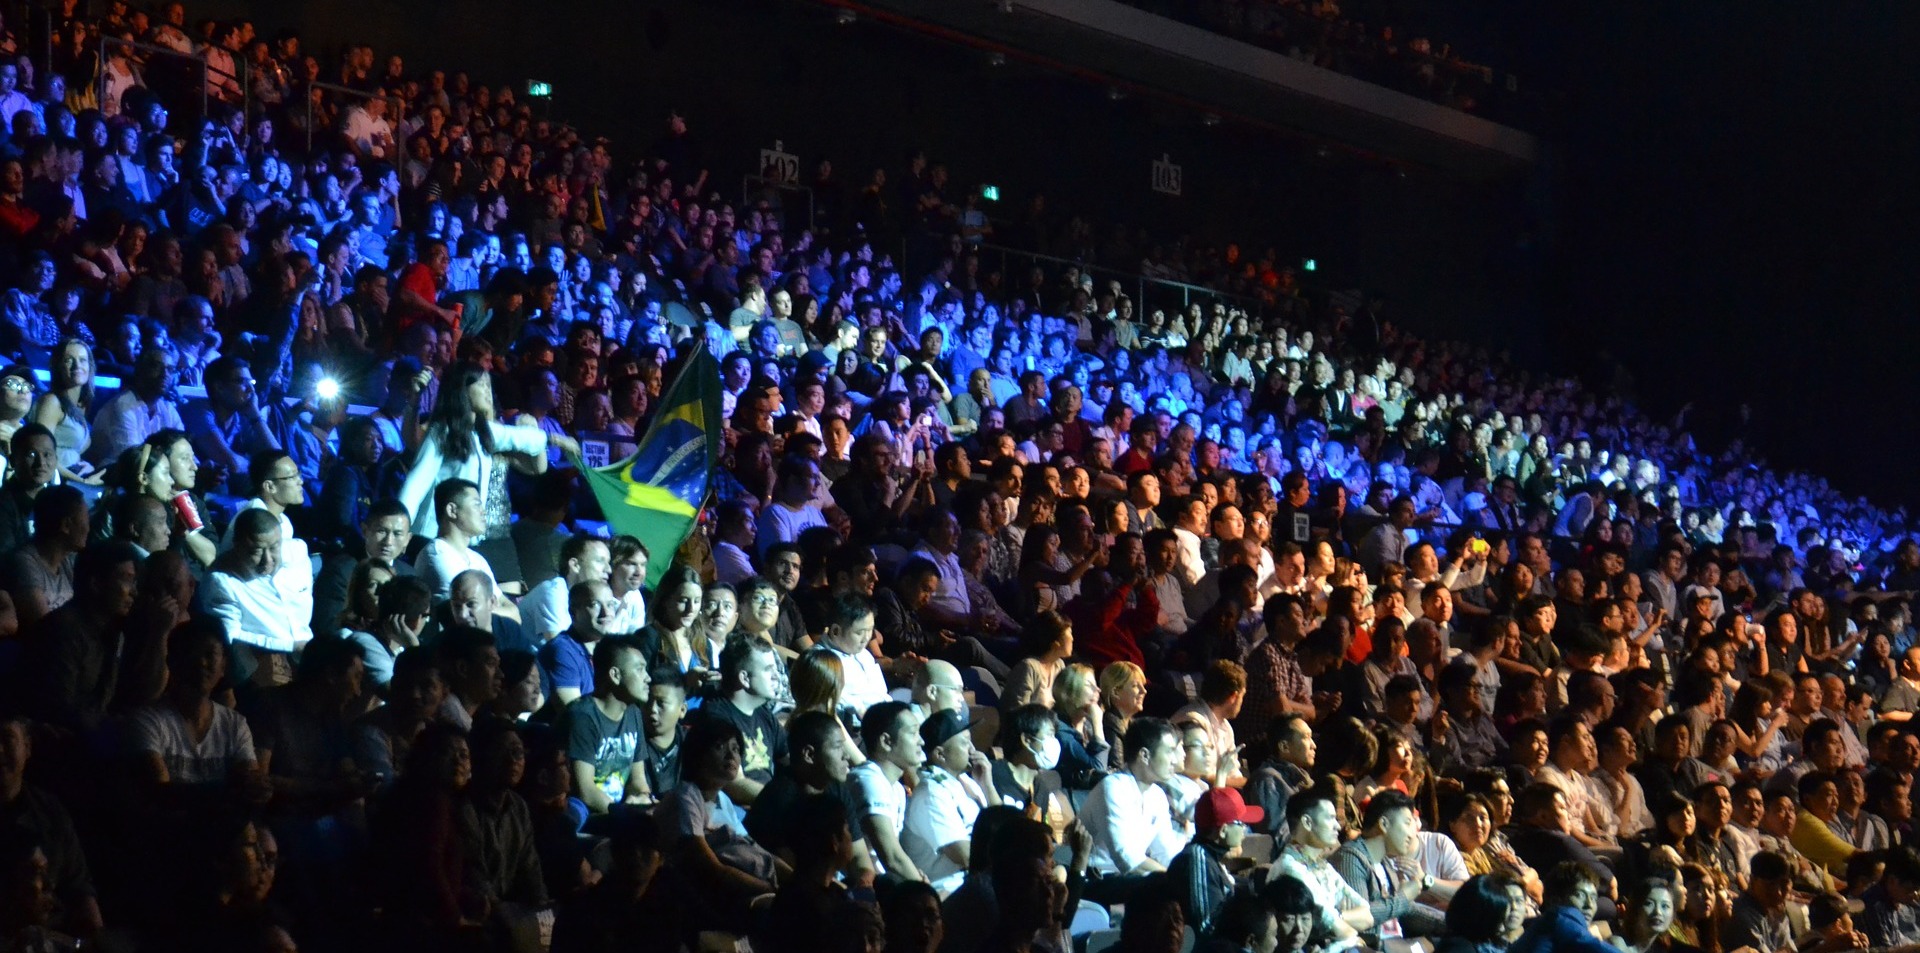 Many people in an audience with blue and white lighting